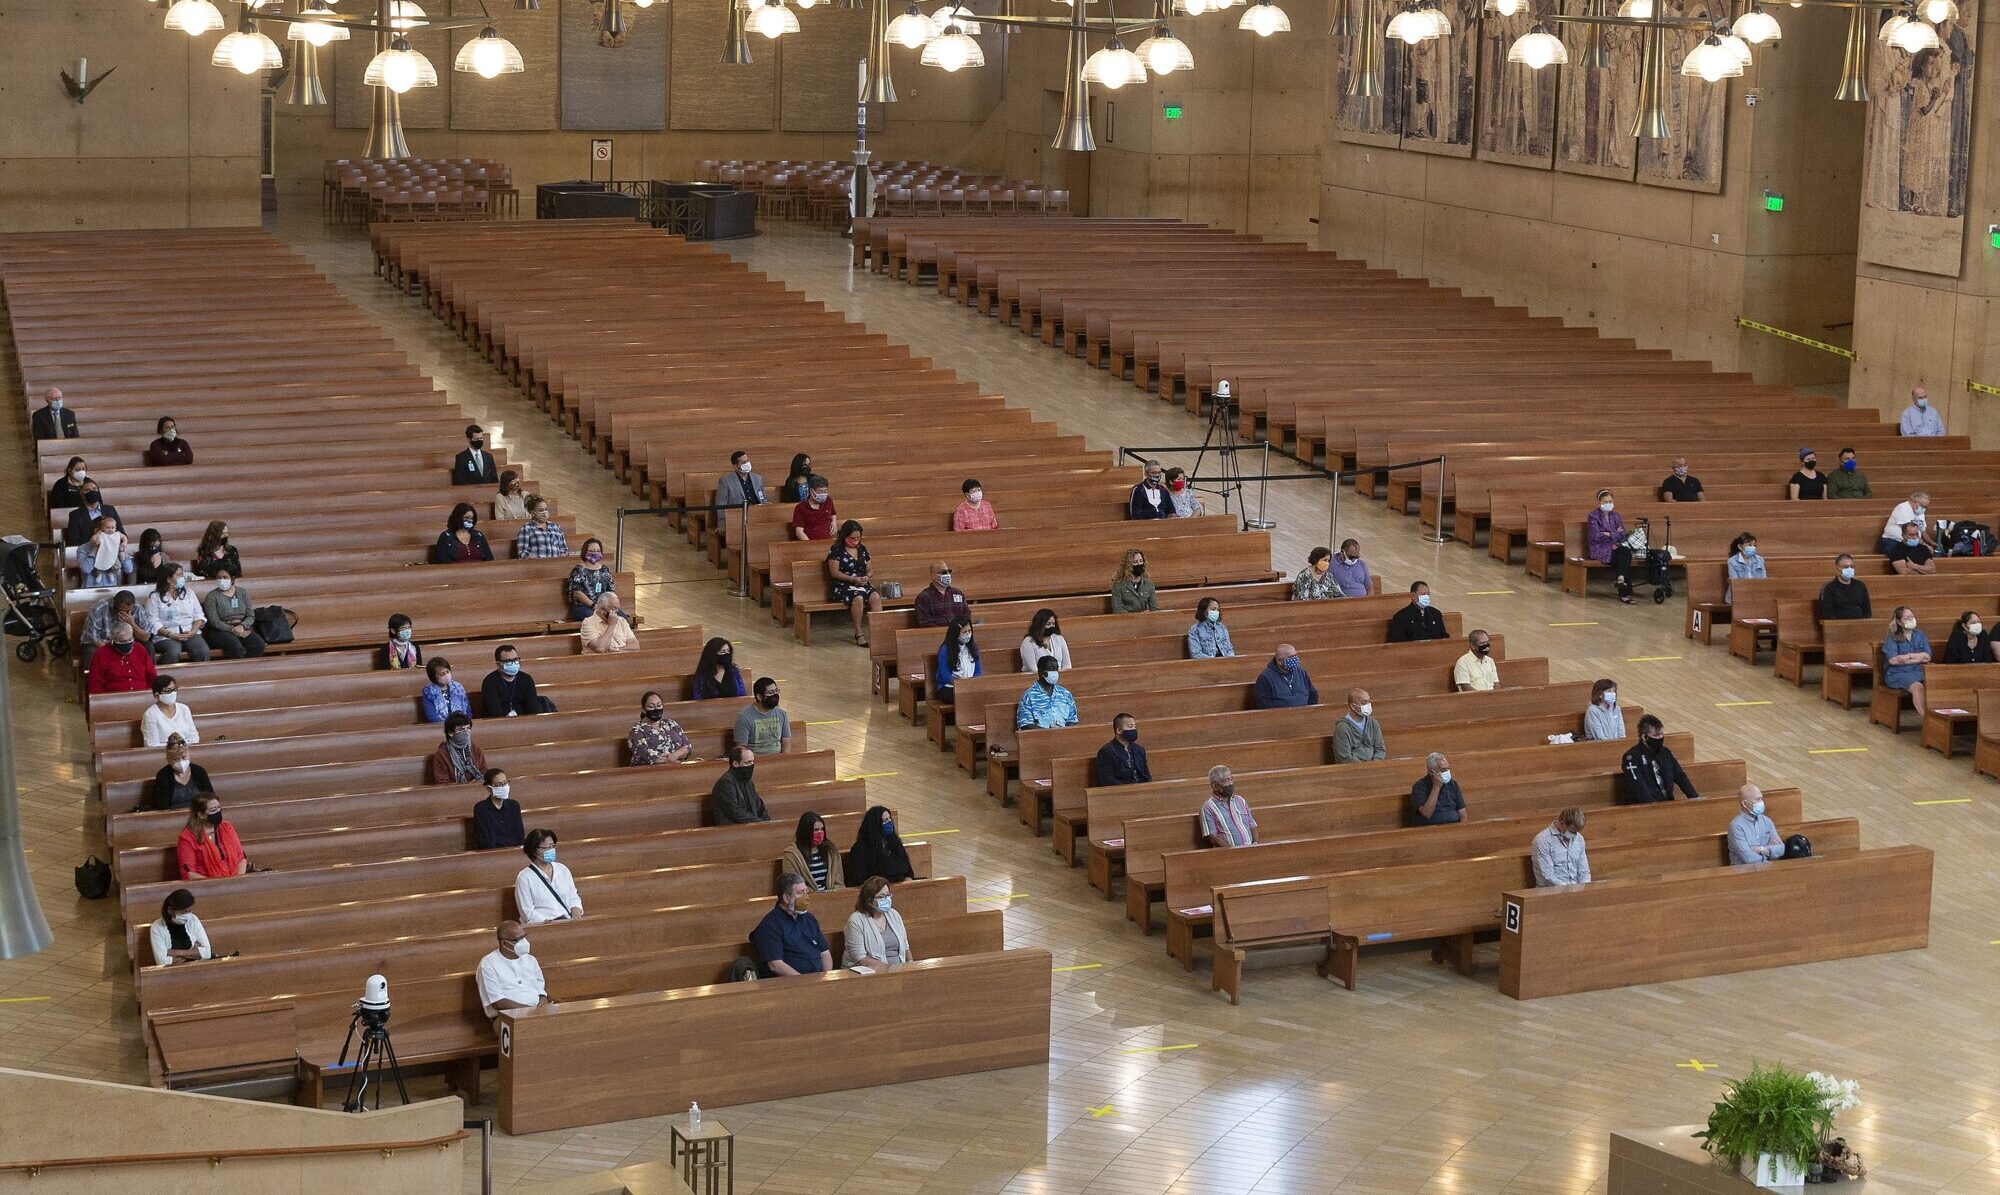 Supreme Court: California County Can’t Prohibit Indoor Church Due to Virus